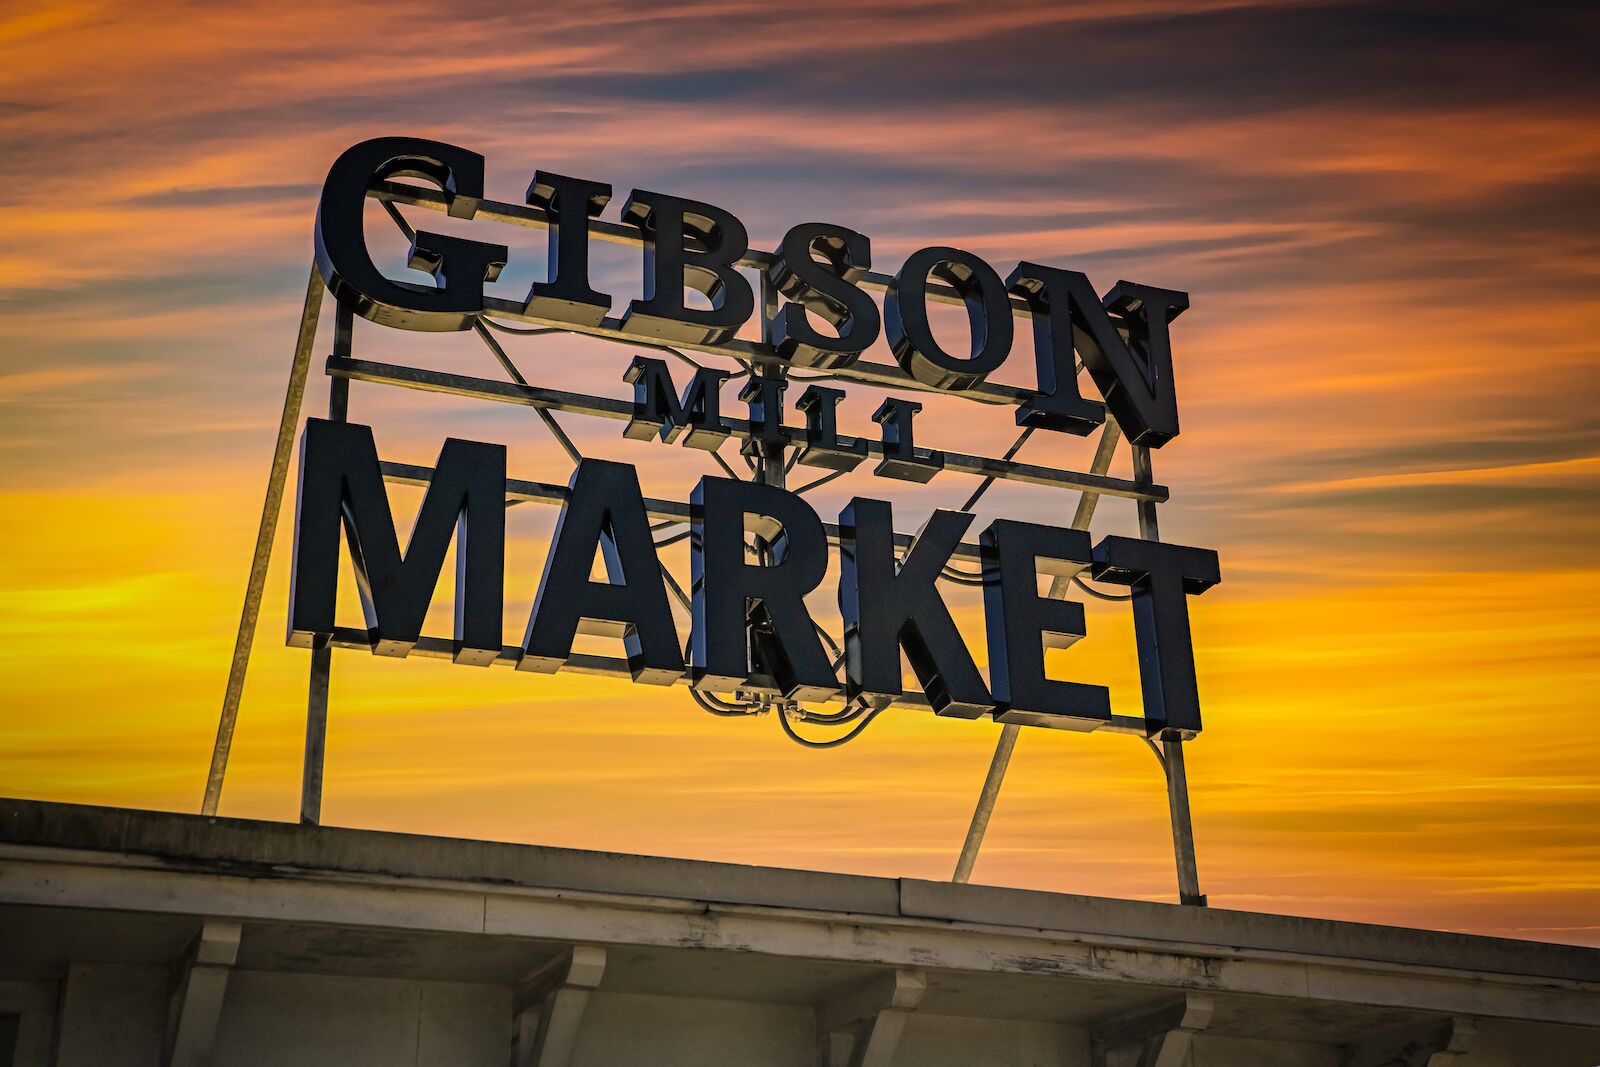 gibson mill market sign cabarrus county